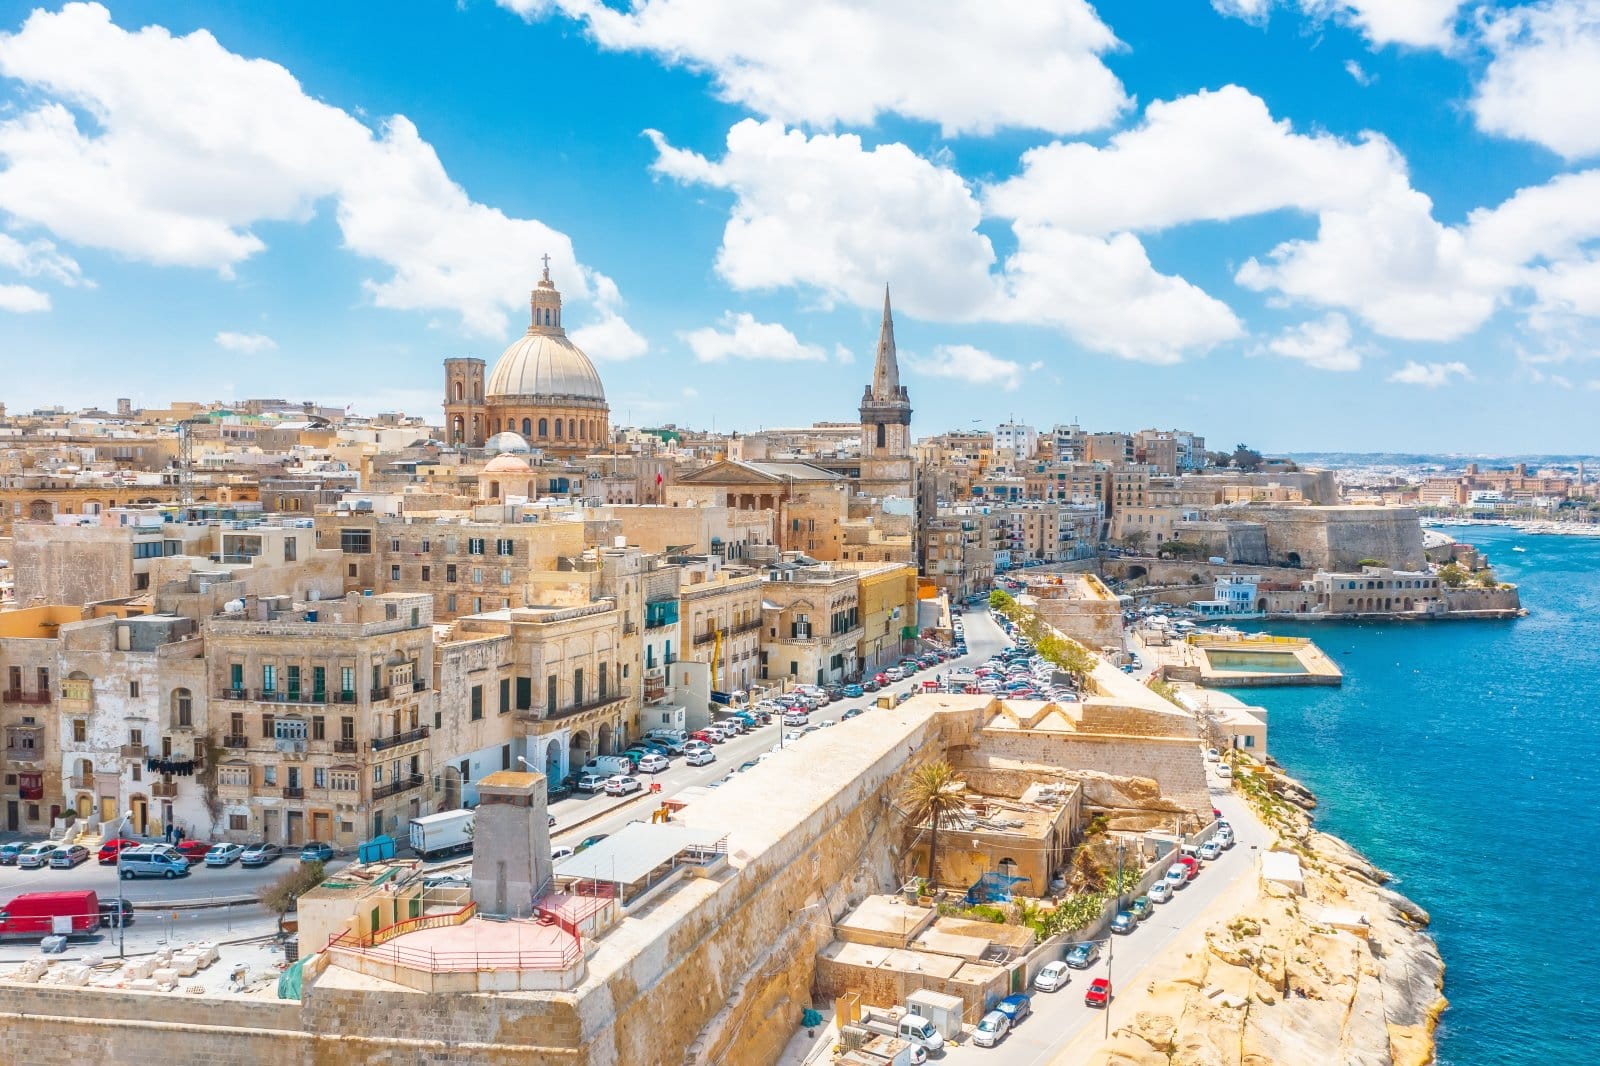 <p><span>Sunny and historic Malta is another beautiful Mediterranean destination that welcomes remote workers to its shores. </span></p><p><b>Cost of application:</b><span> 300 EUR</span></p><p><b>Income requirement:</b><span> 2700 EUR per month</span></p><p><b>Visa duration: </b><span>6 months to 1 year</span></p>